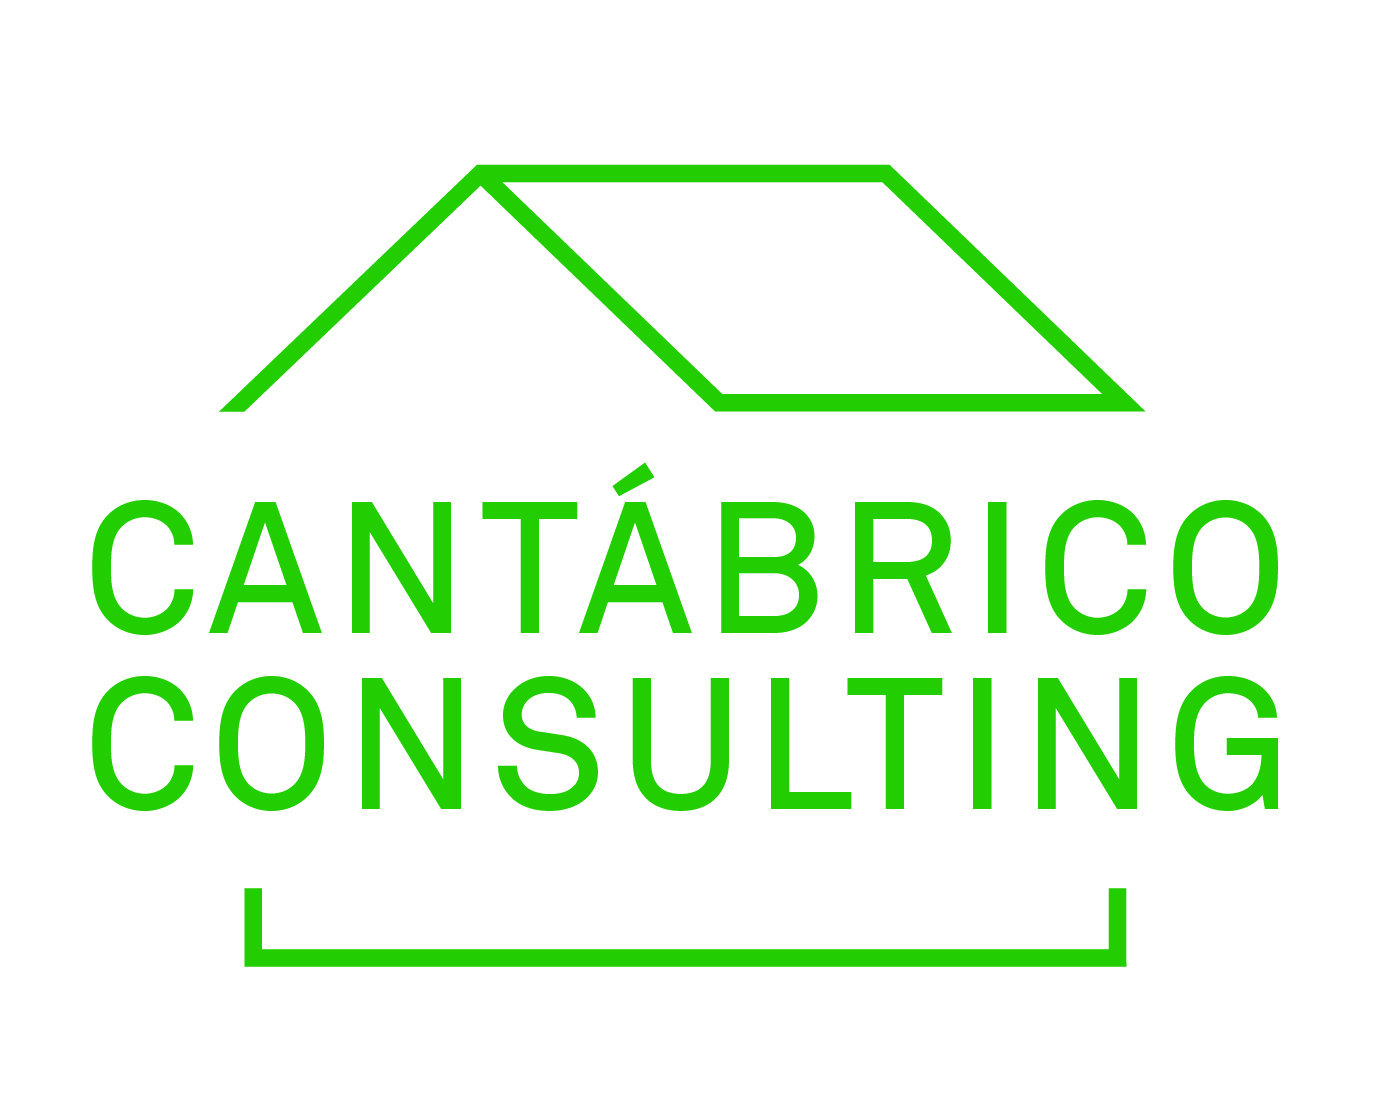 Cantábrico Consulting